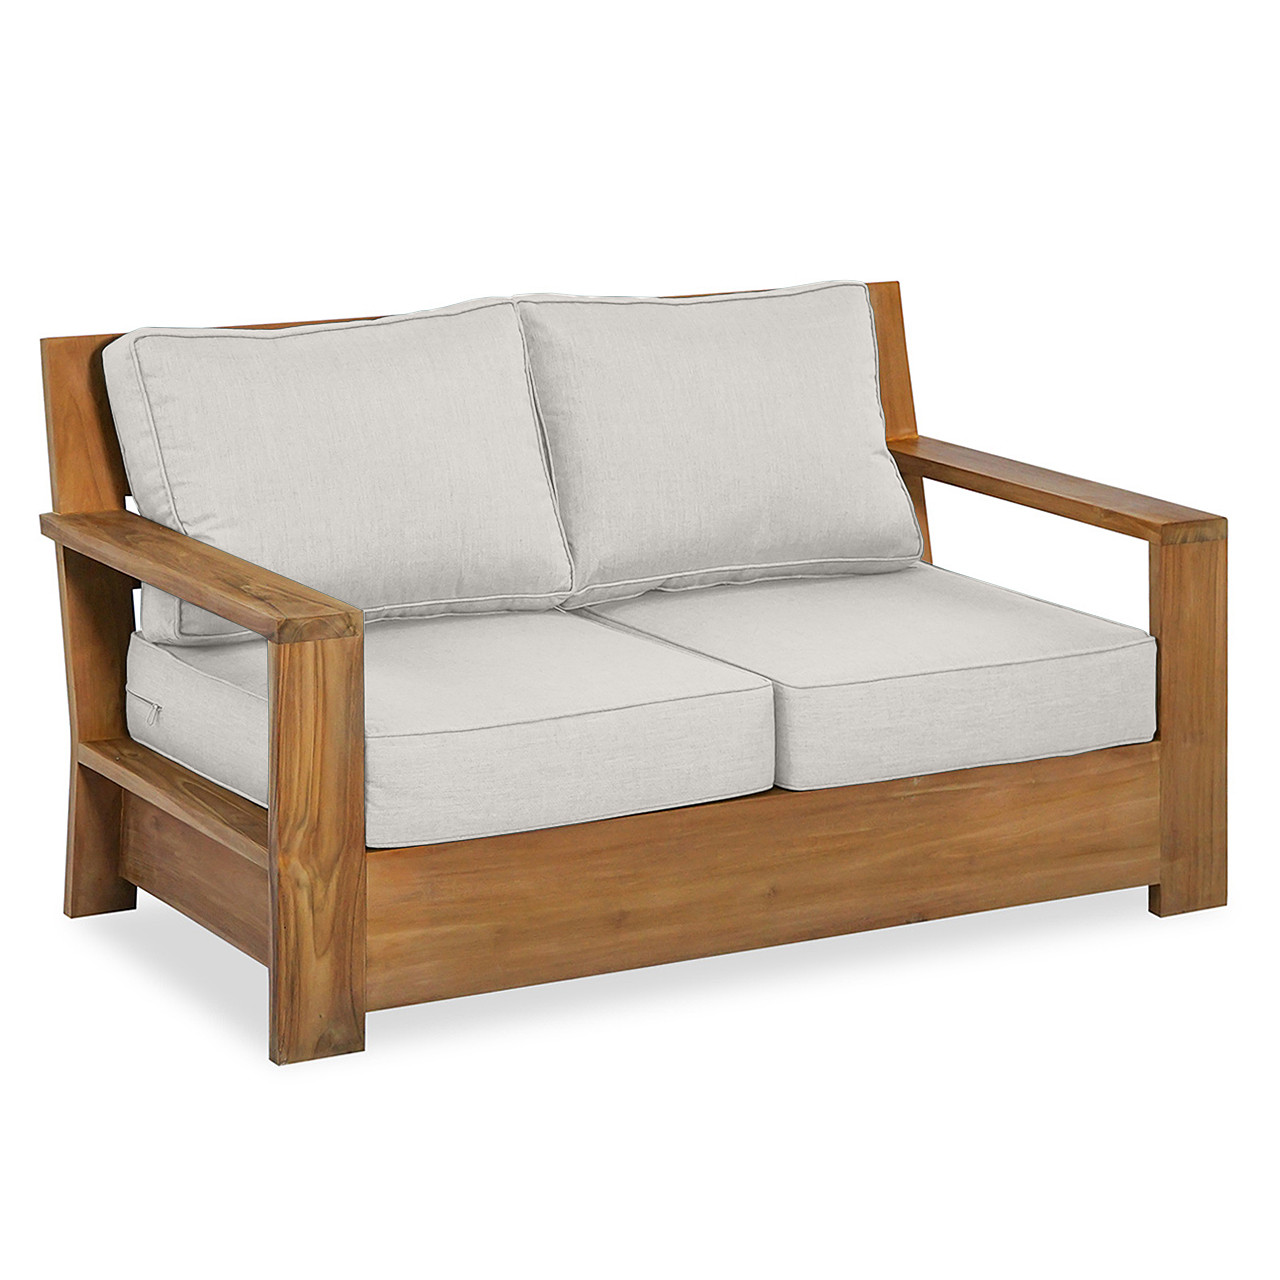 Castello Natural Oil Stain Teak with Cushions Loveseat